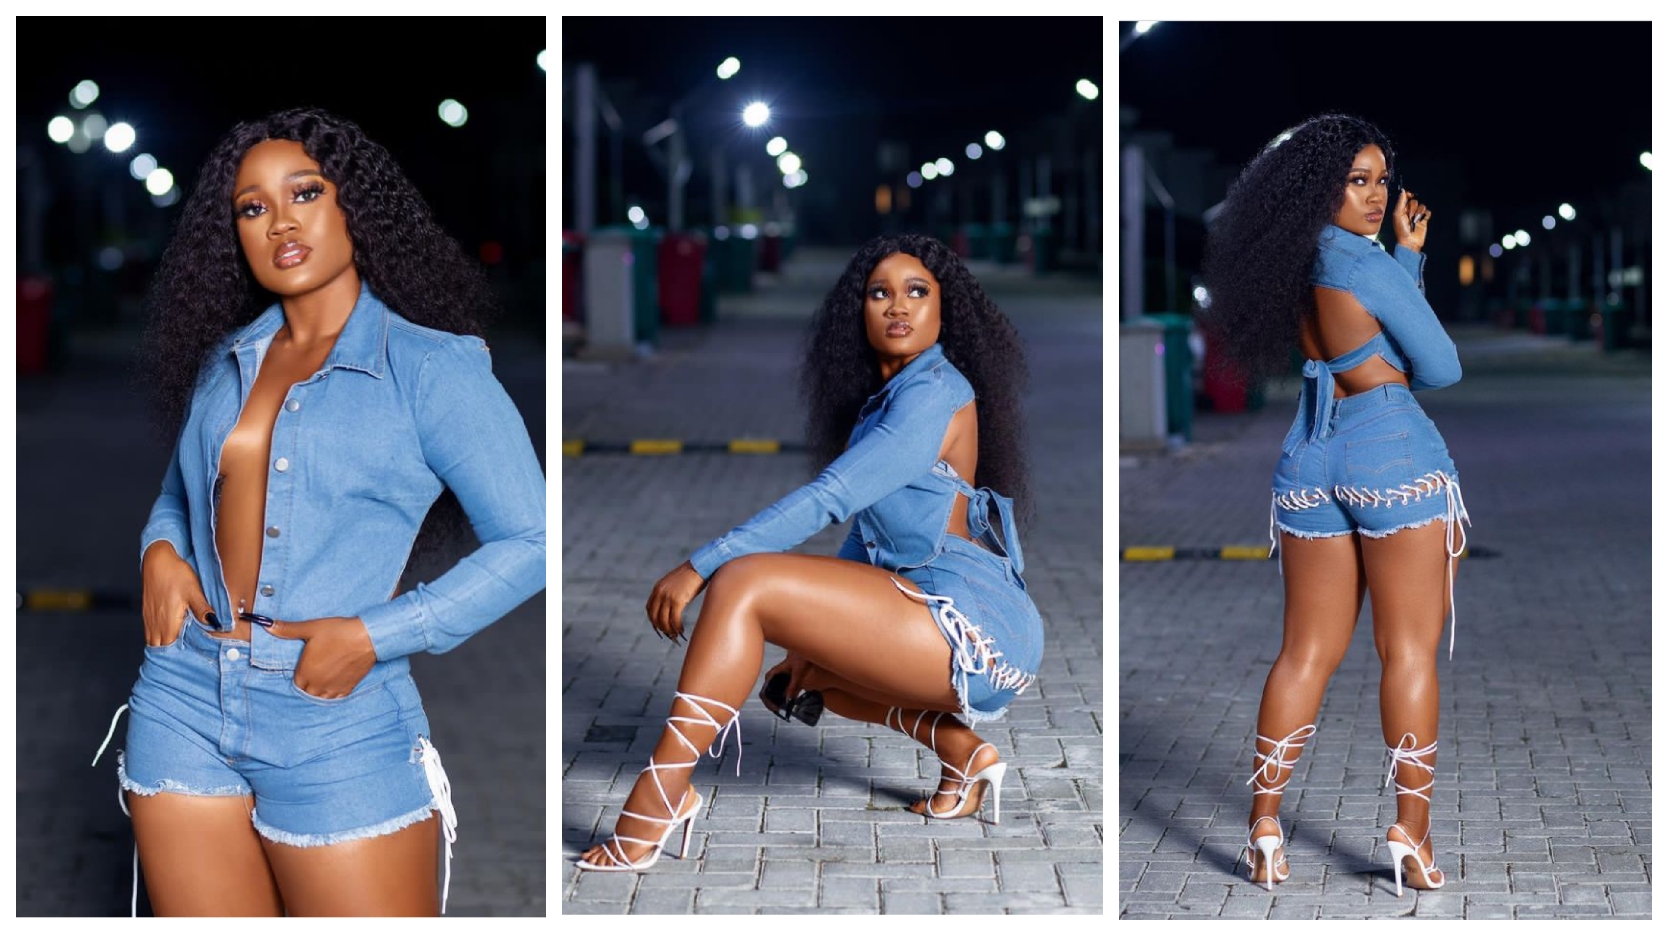 Cee-c is very beautiful, check out her recent pictures that triggered reactions